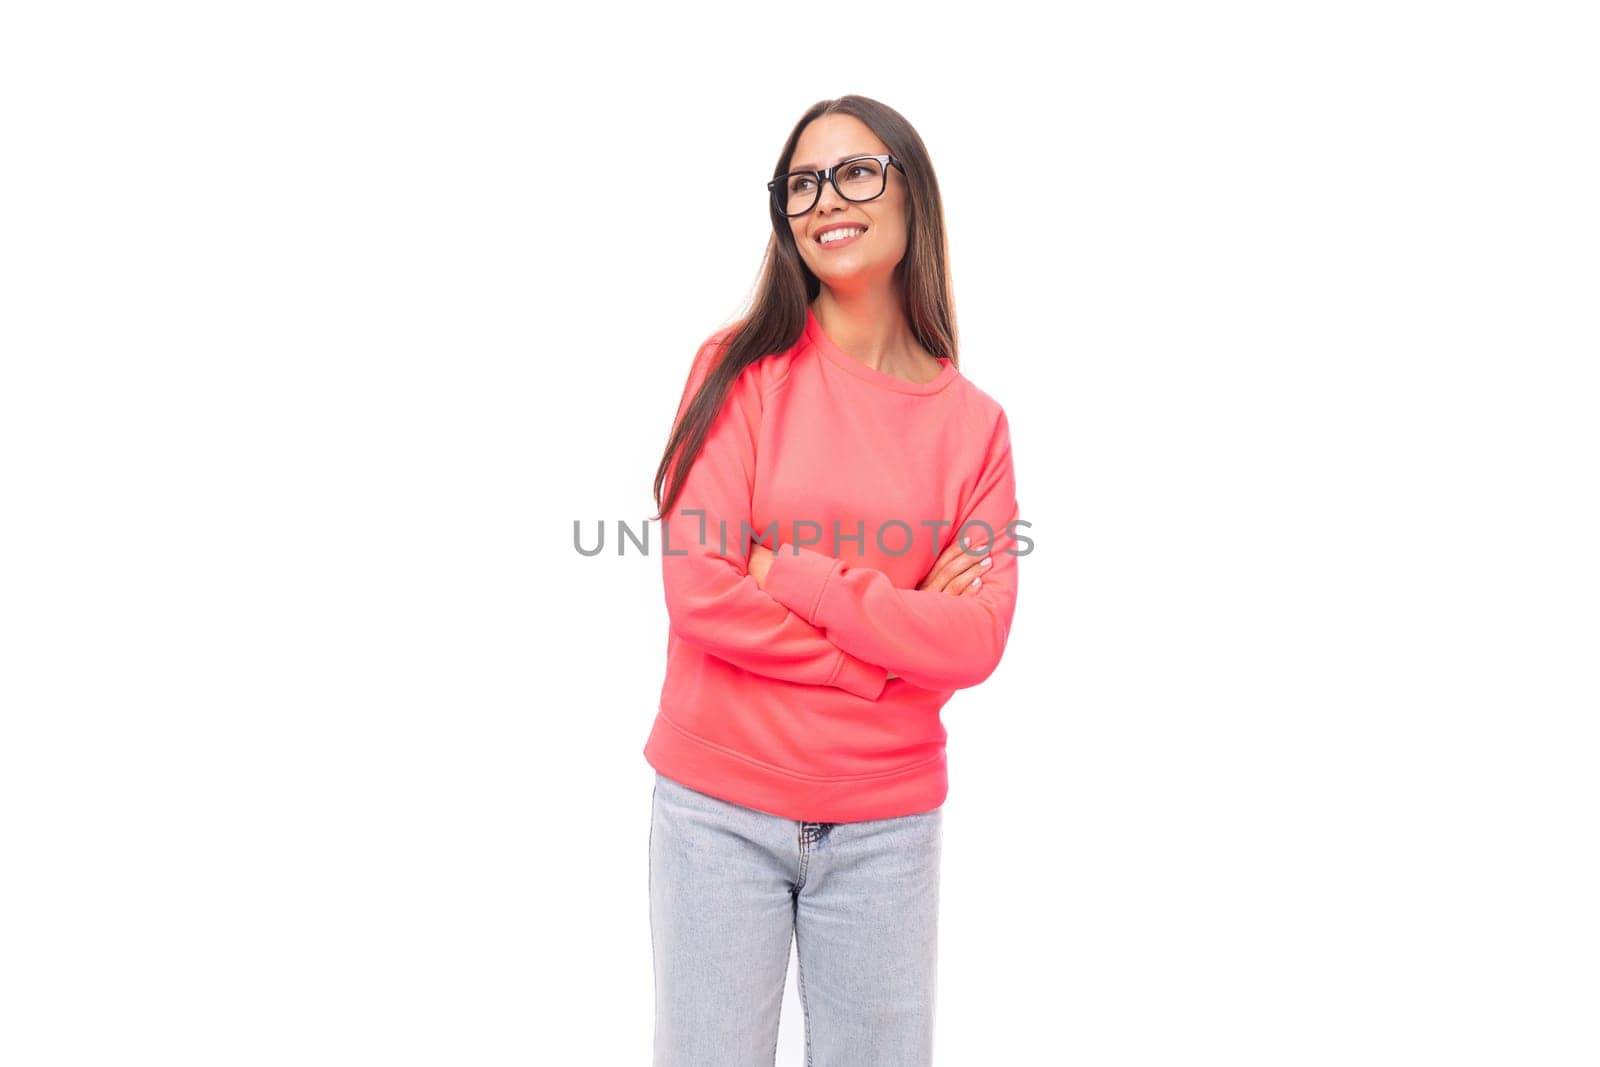 pretty young brunette caucasian woman with straight hair is dressed in a pink sweatshirt and jeans among a white background.